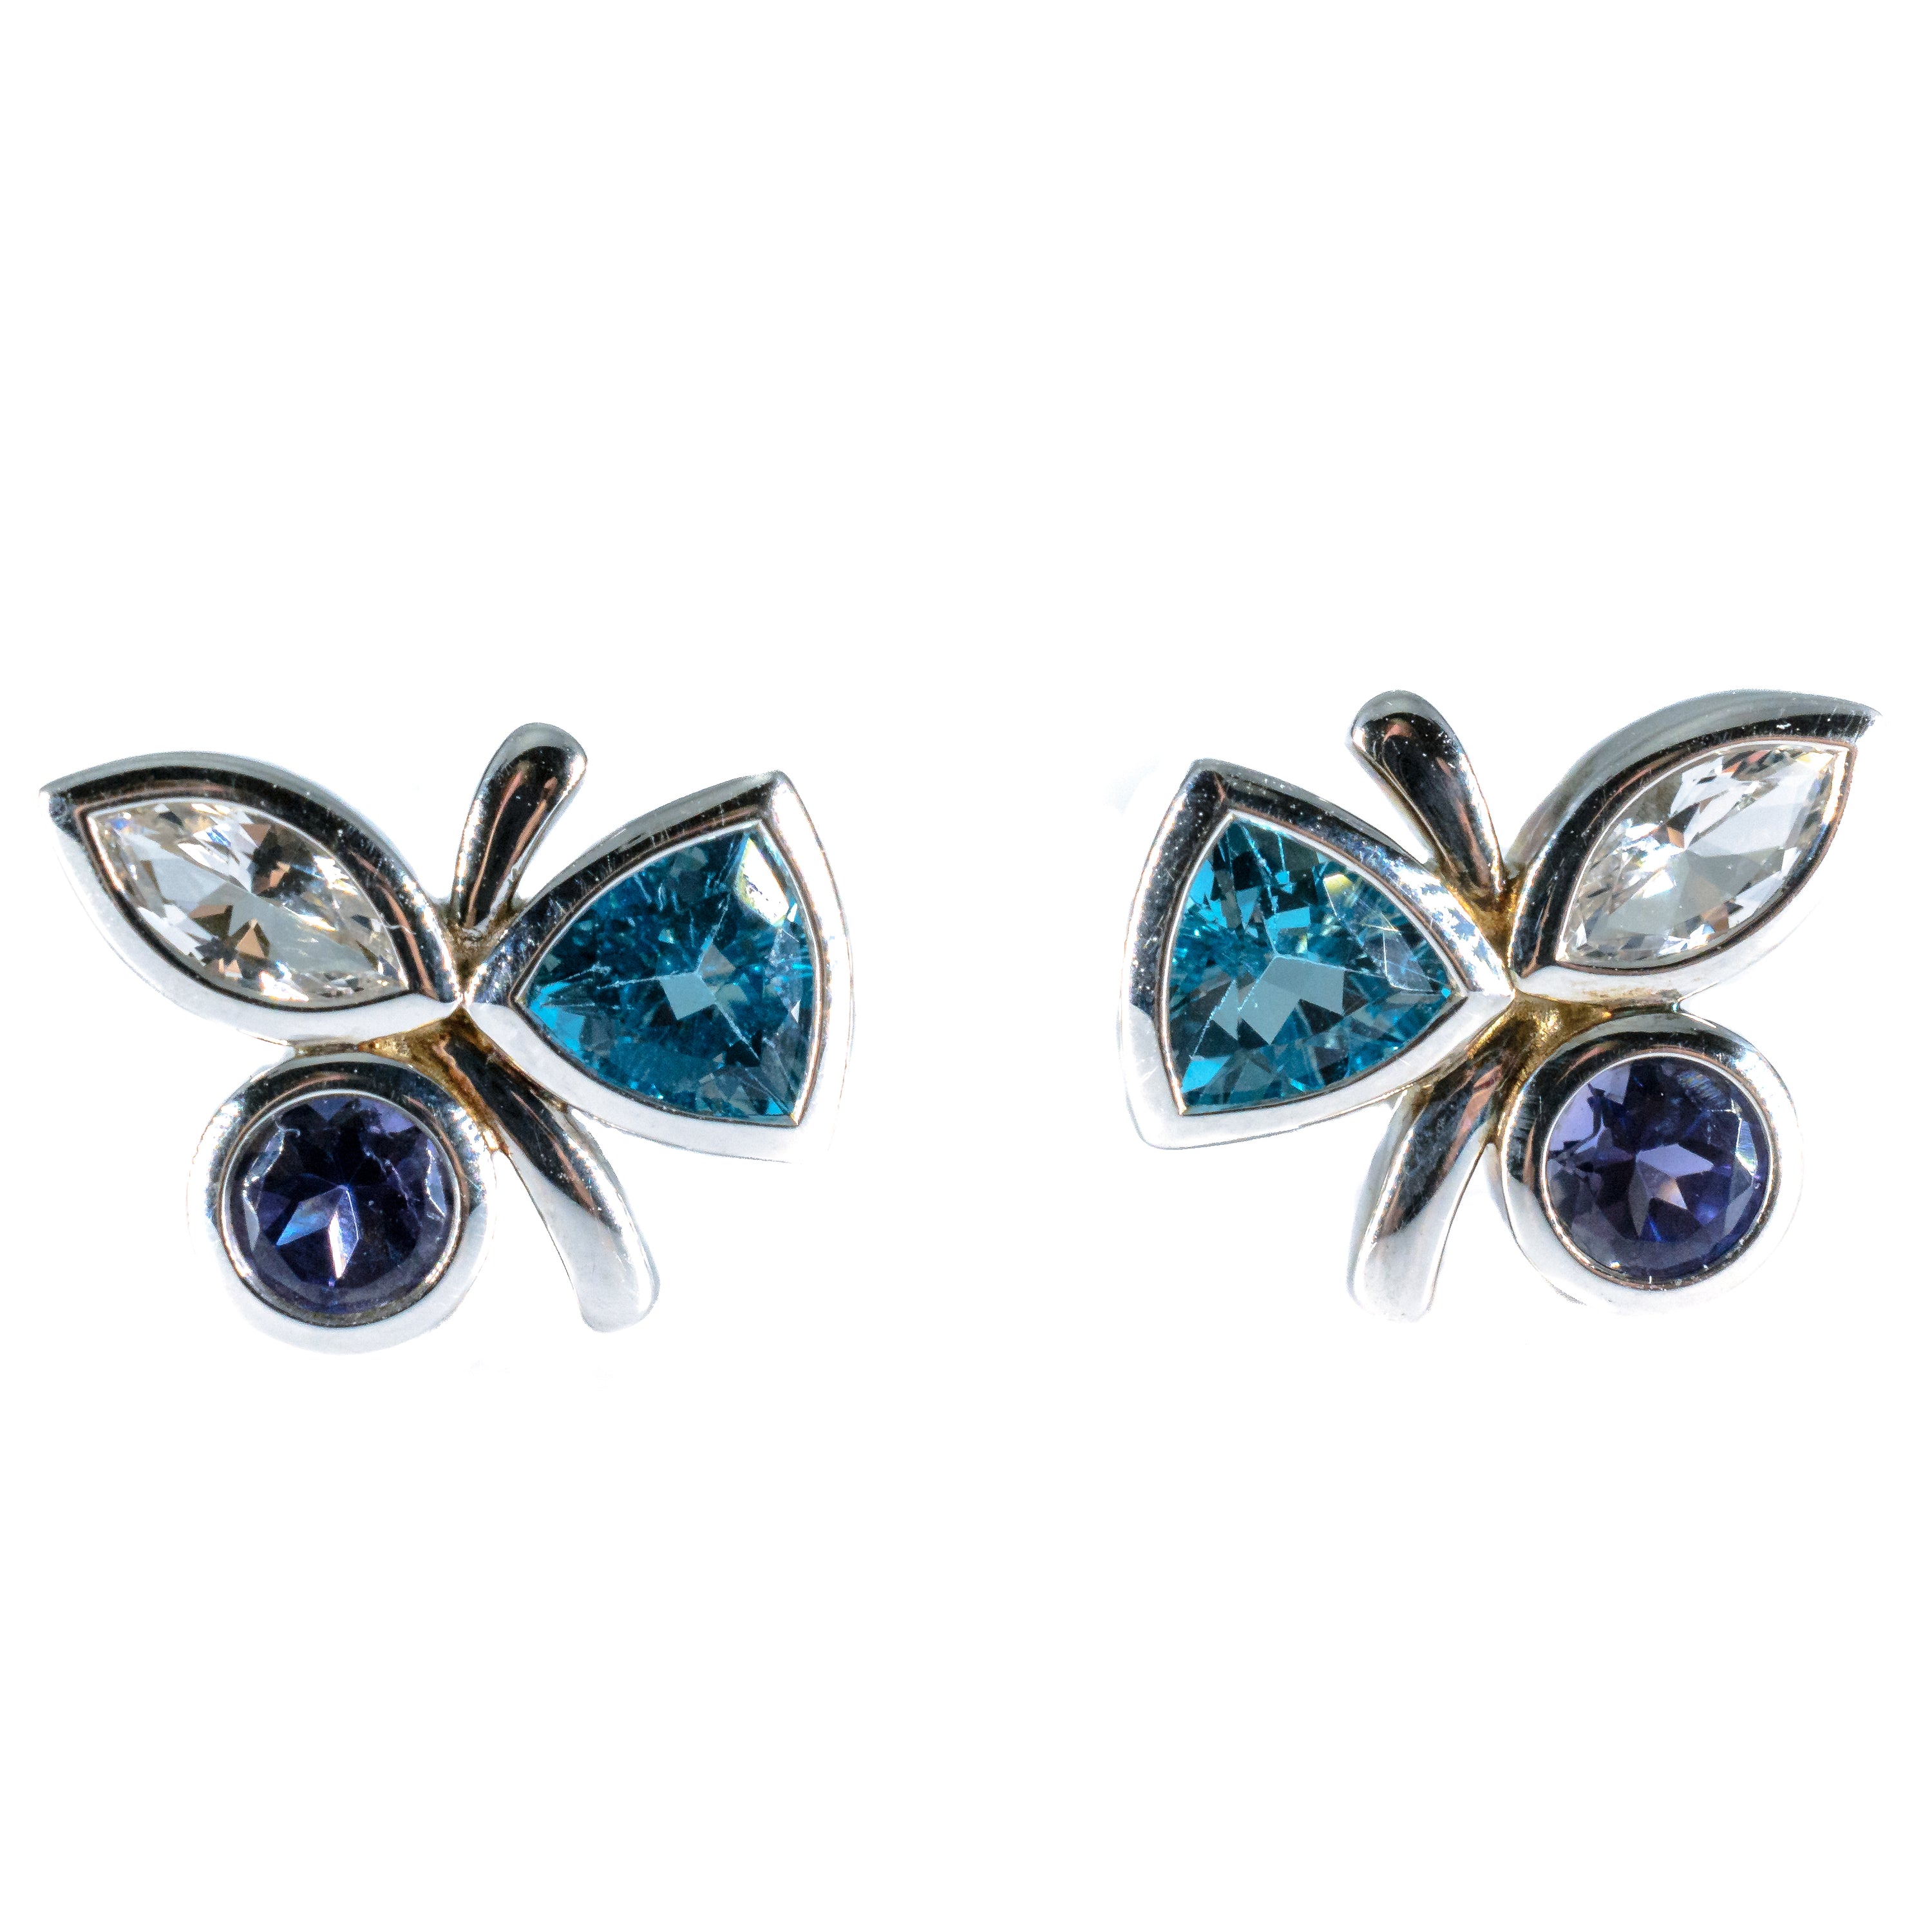 Silver Petal Earrings with Blue-White Topaz and Iolite